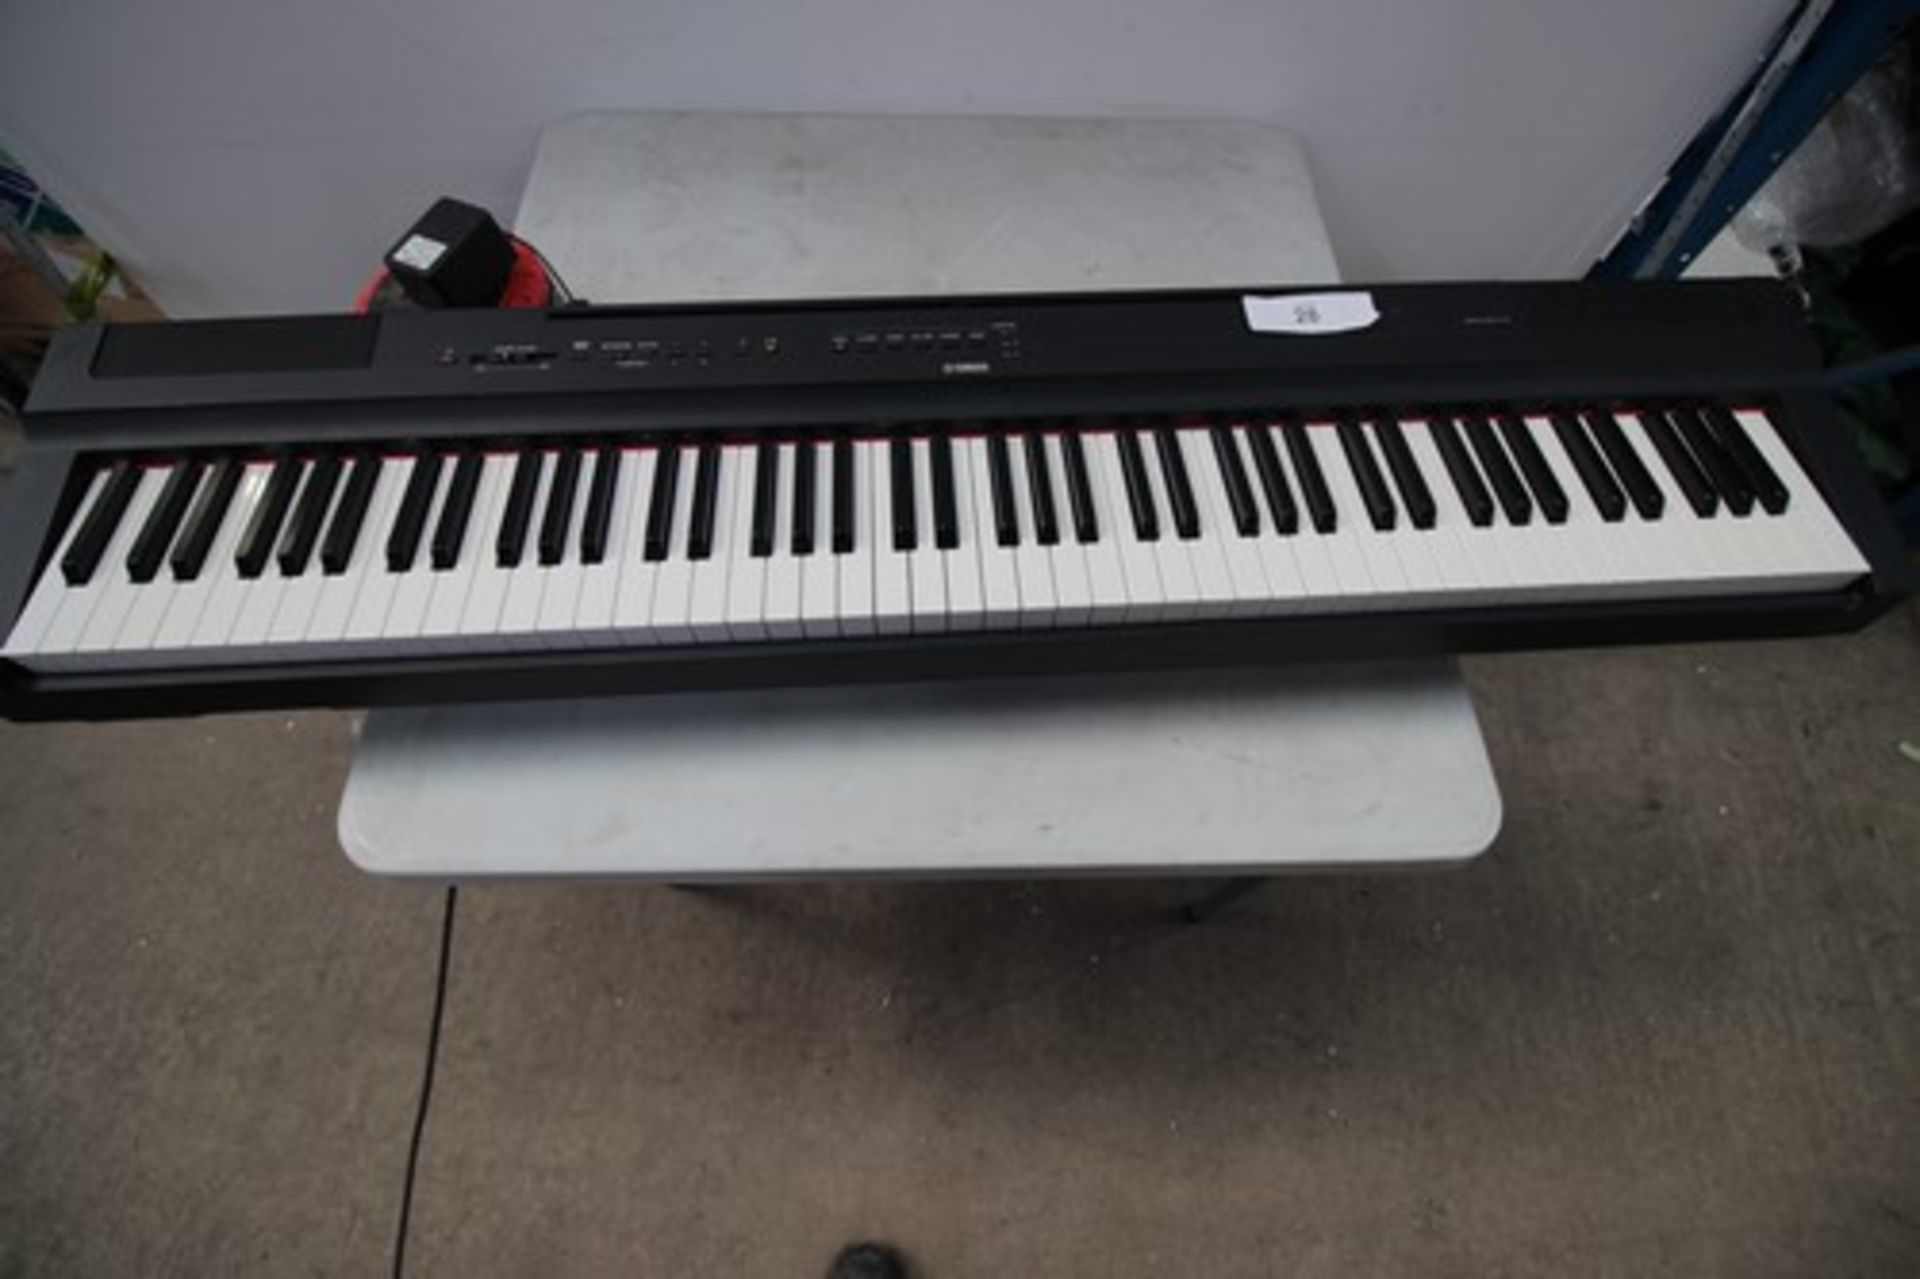 1 x Yamaha P-225B digital piano, powers on ok, not fully tested, cracked case lower right - second-